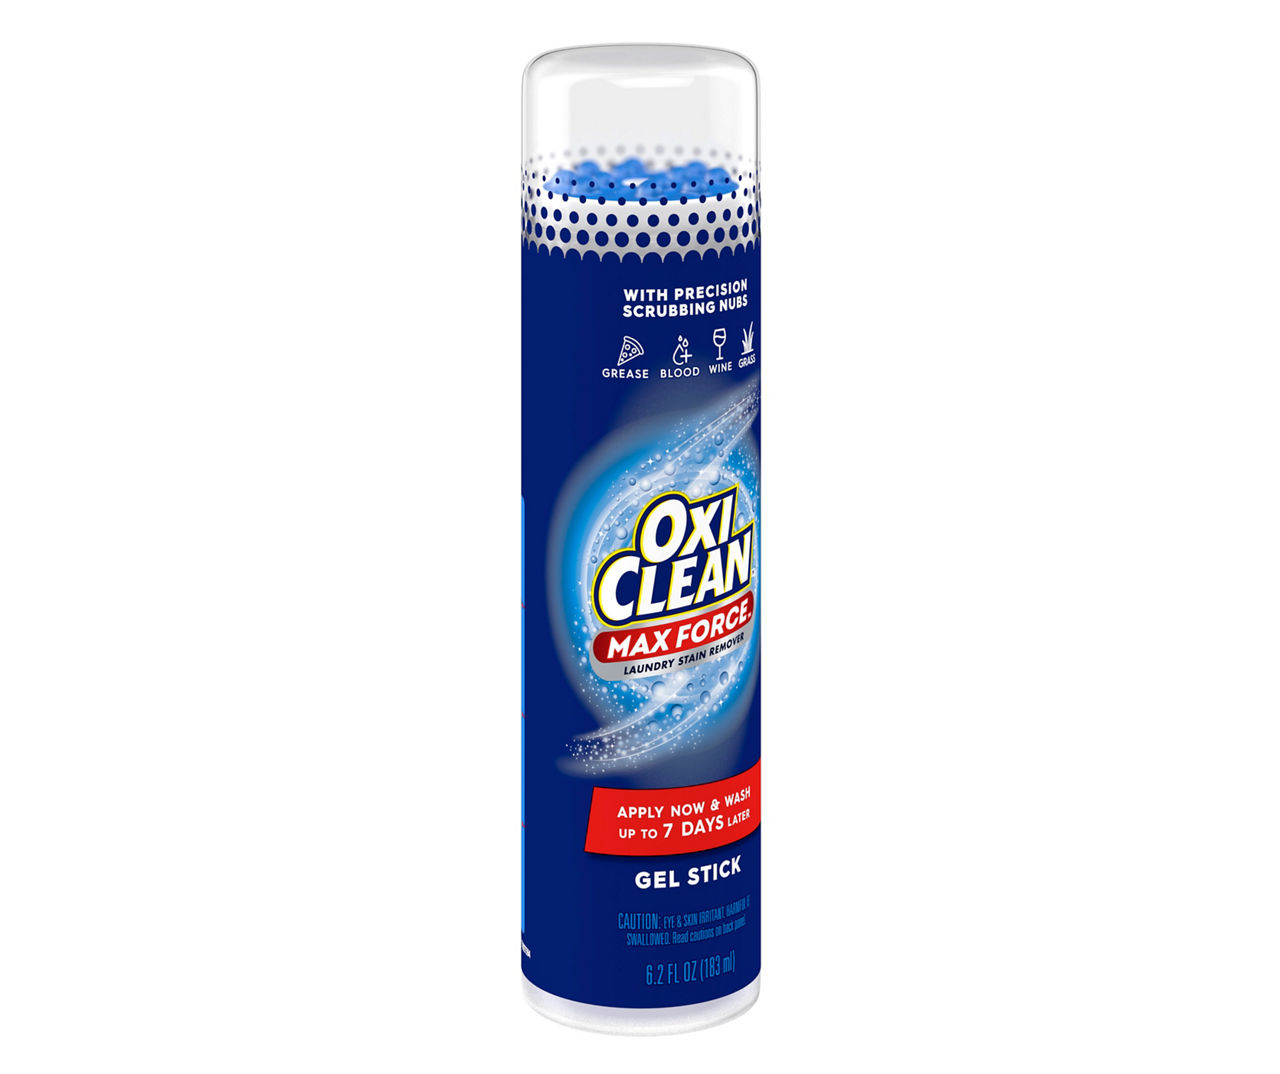 OXICLEAN OxiClean Max Force Laundry Stain Remover Gel Stick 6.2 oz. Stick